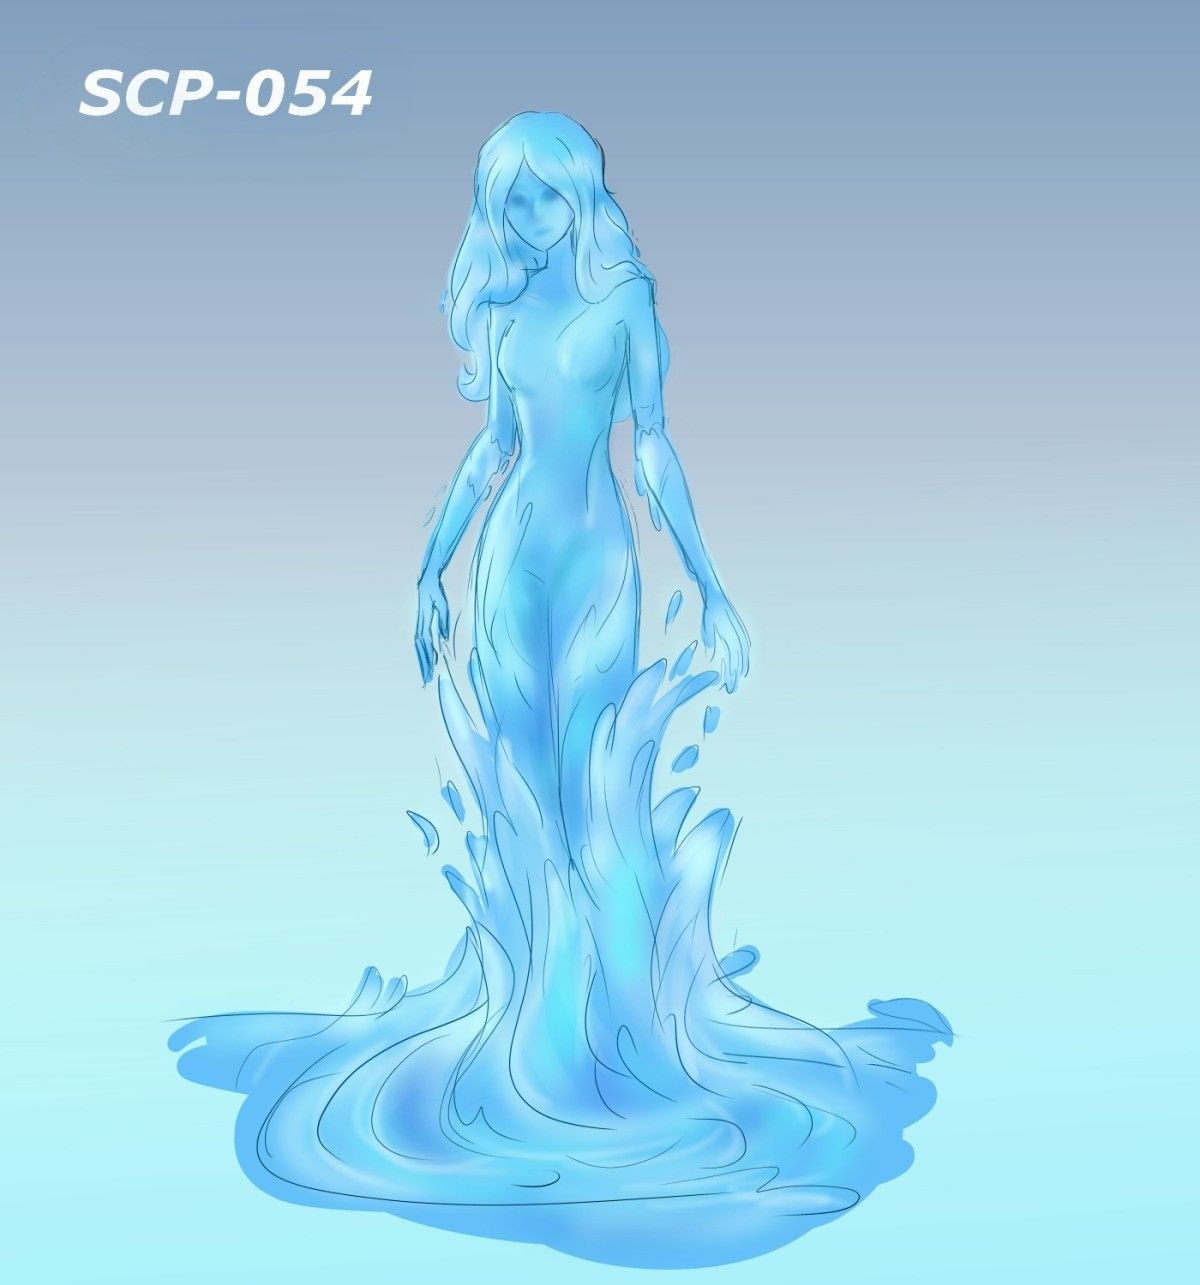 SCP-5514 - SCP Foundation